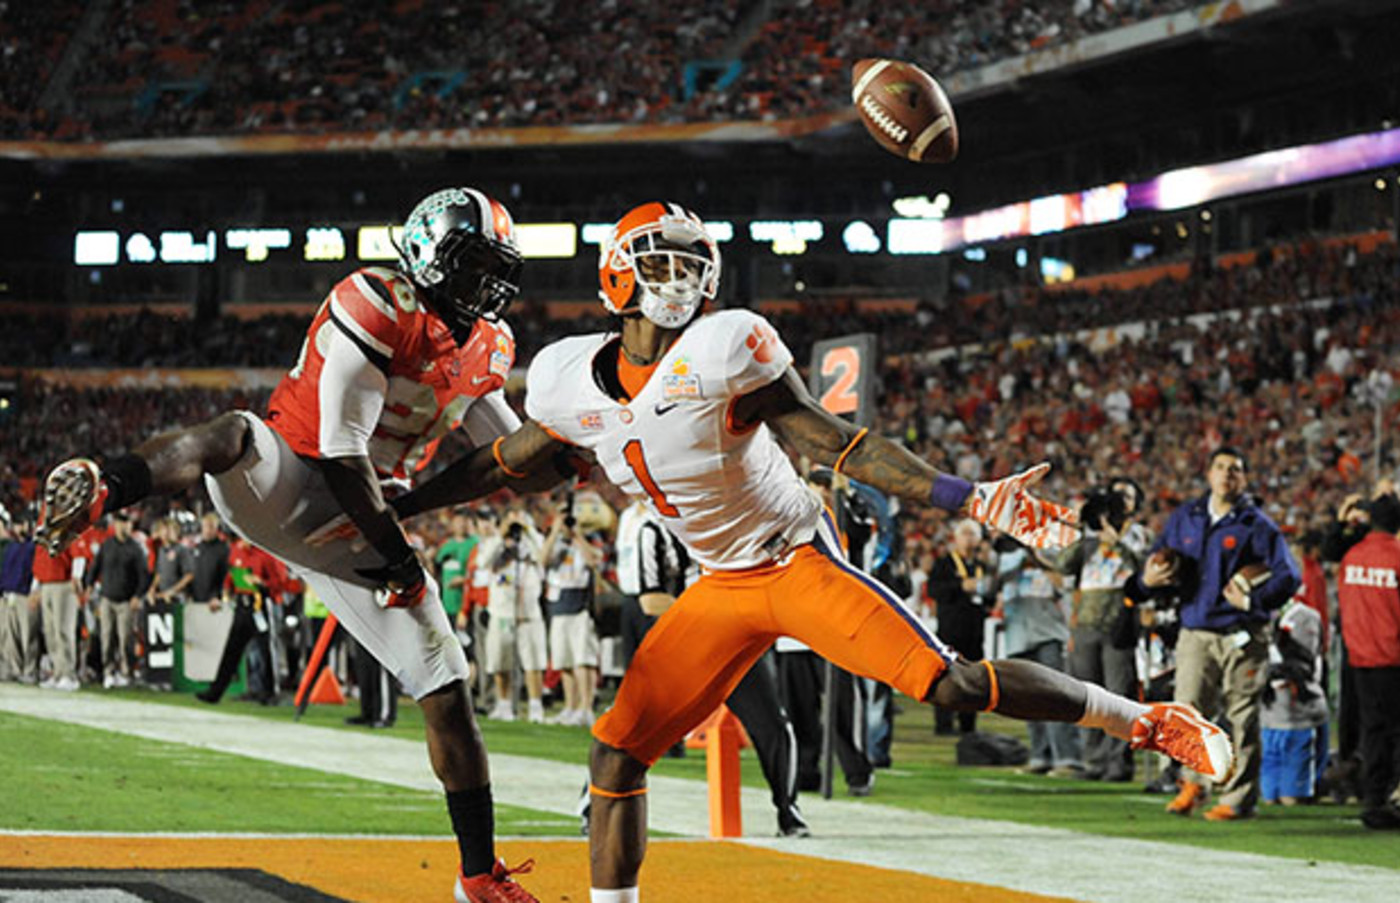 Clemson Wins and Combines With Ohio State for Over 1,000 Yards in